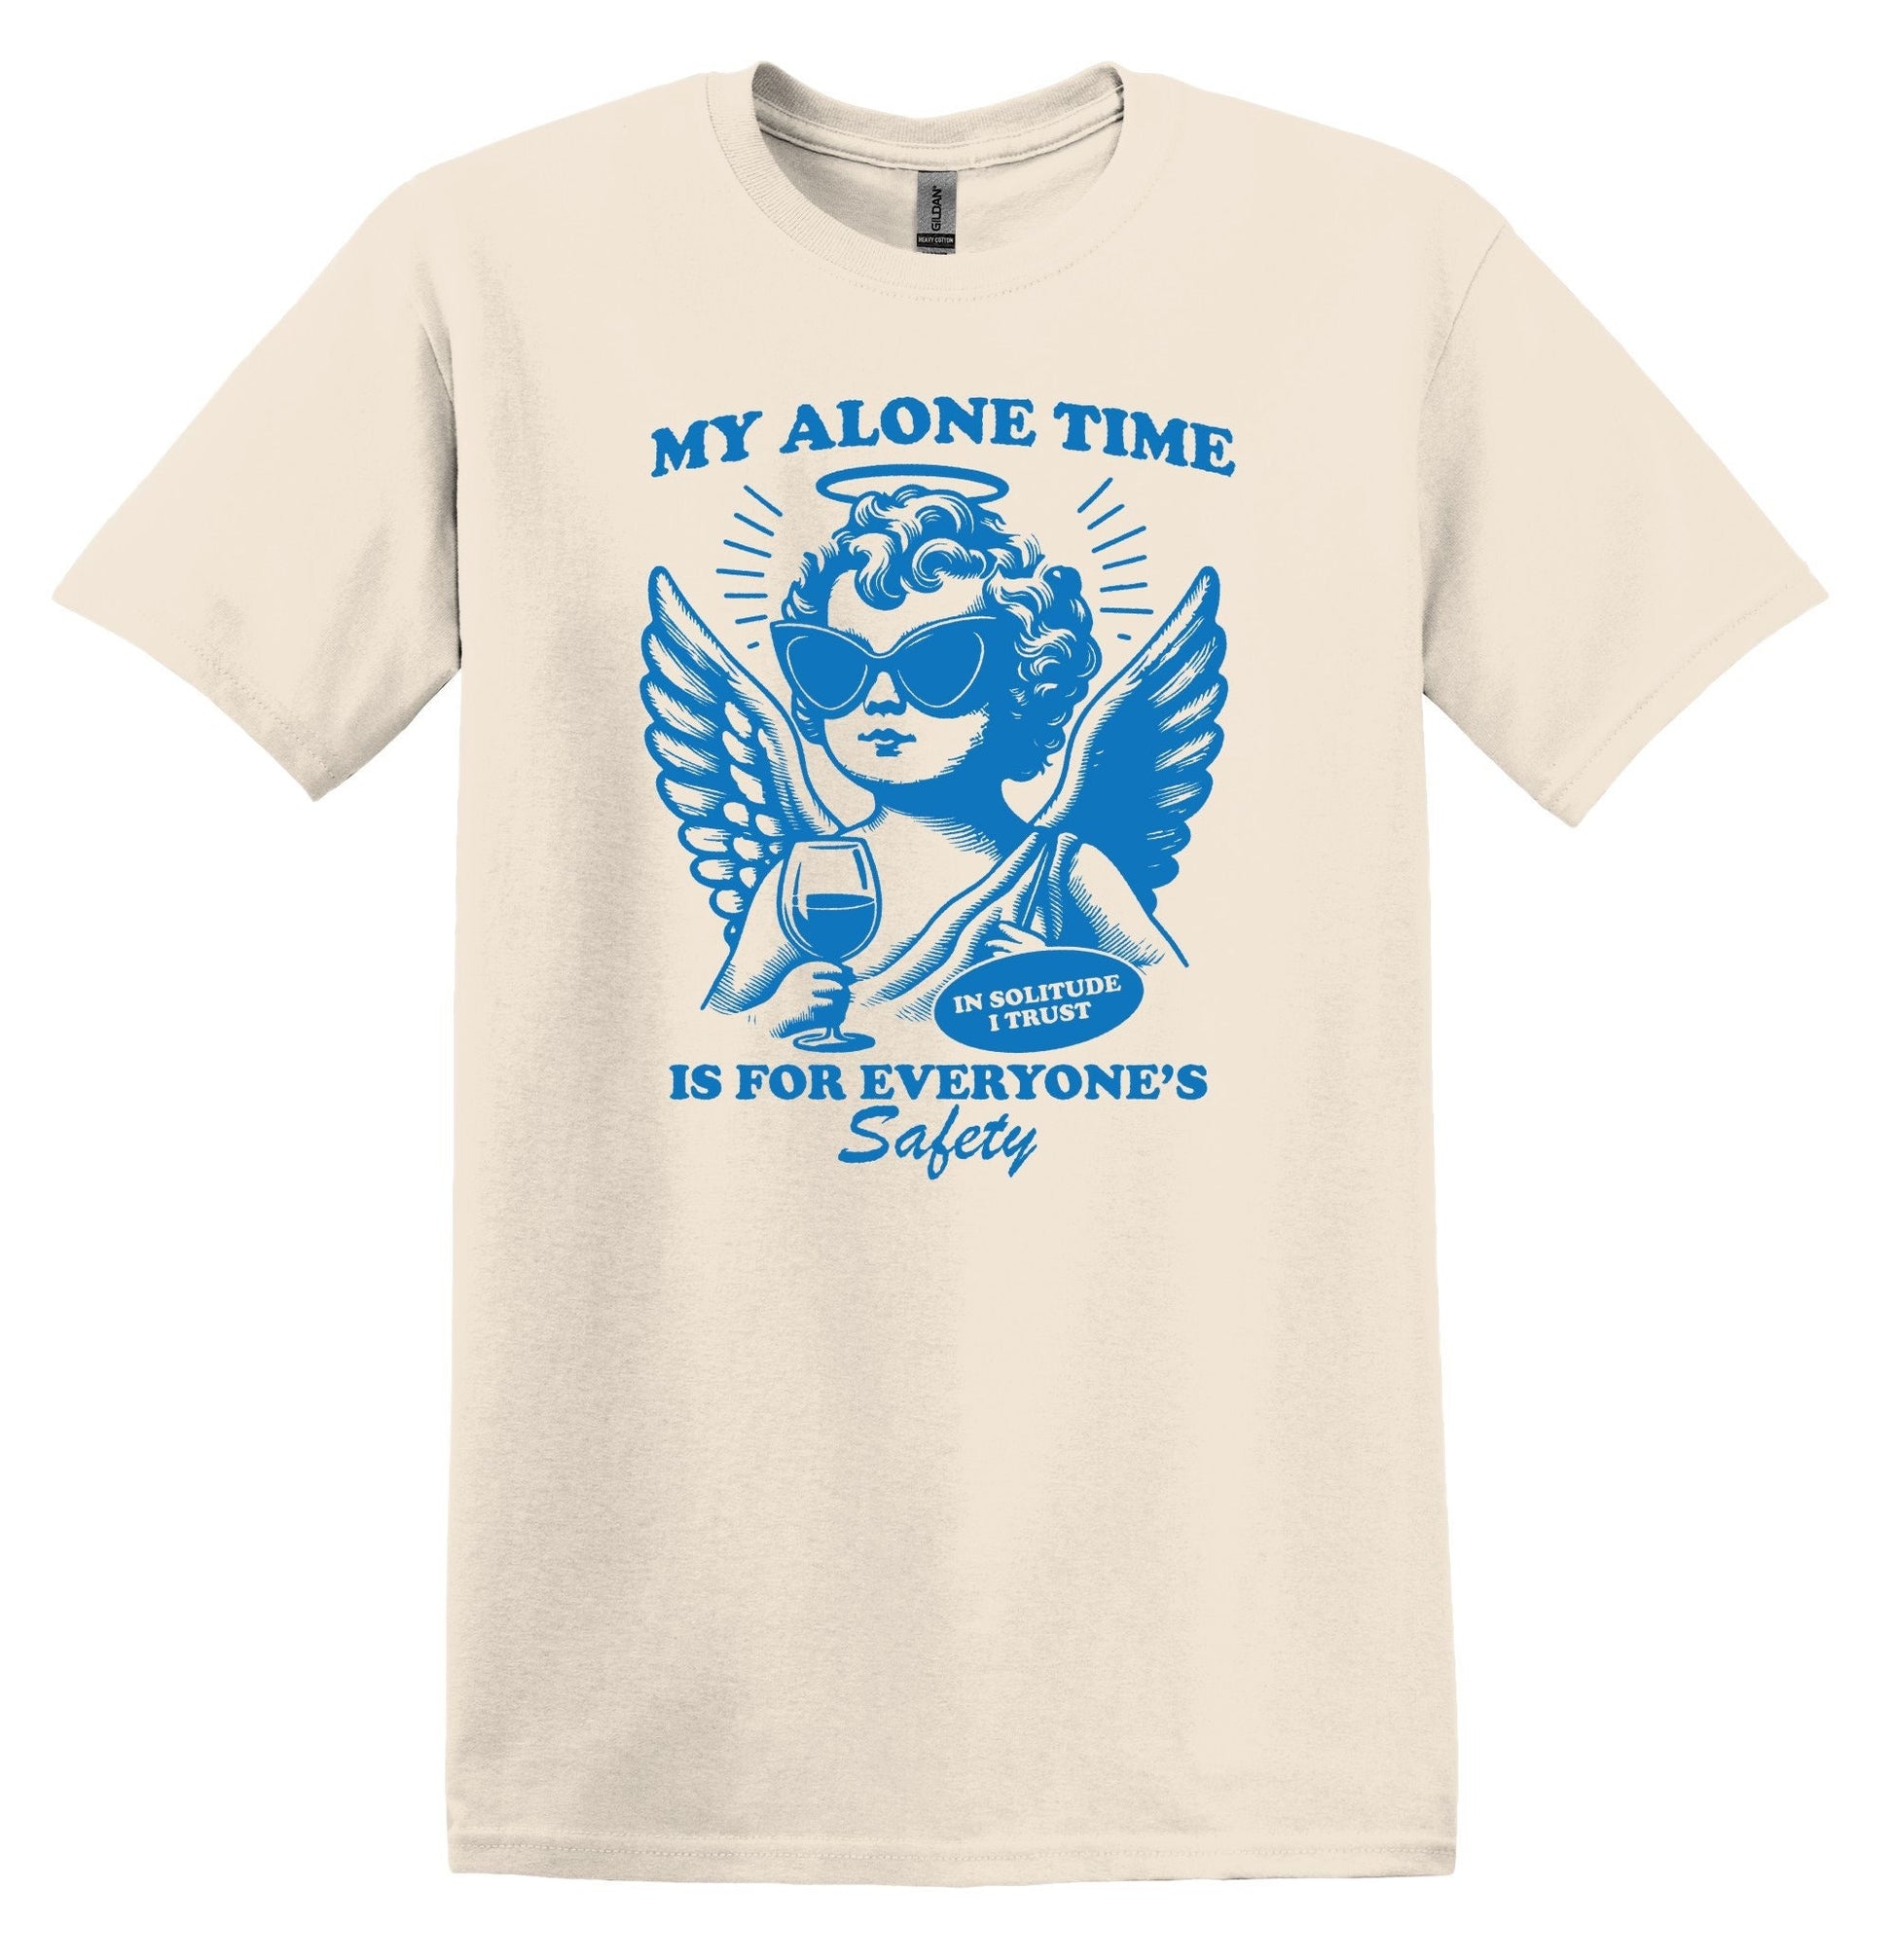 My Alone Time is for Everyone's Saftey Shirt Minimalist Gag Shirt Meme Shirt Funny Unisex Shirt Cool Friends Gift